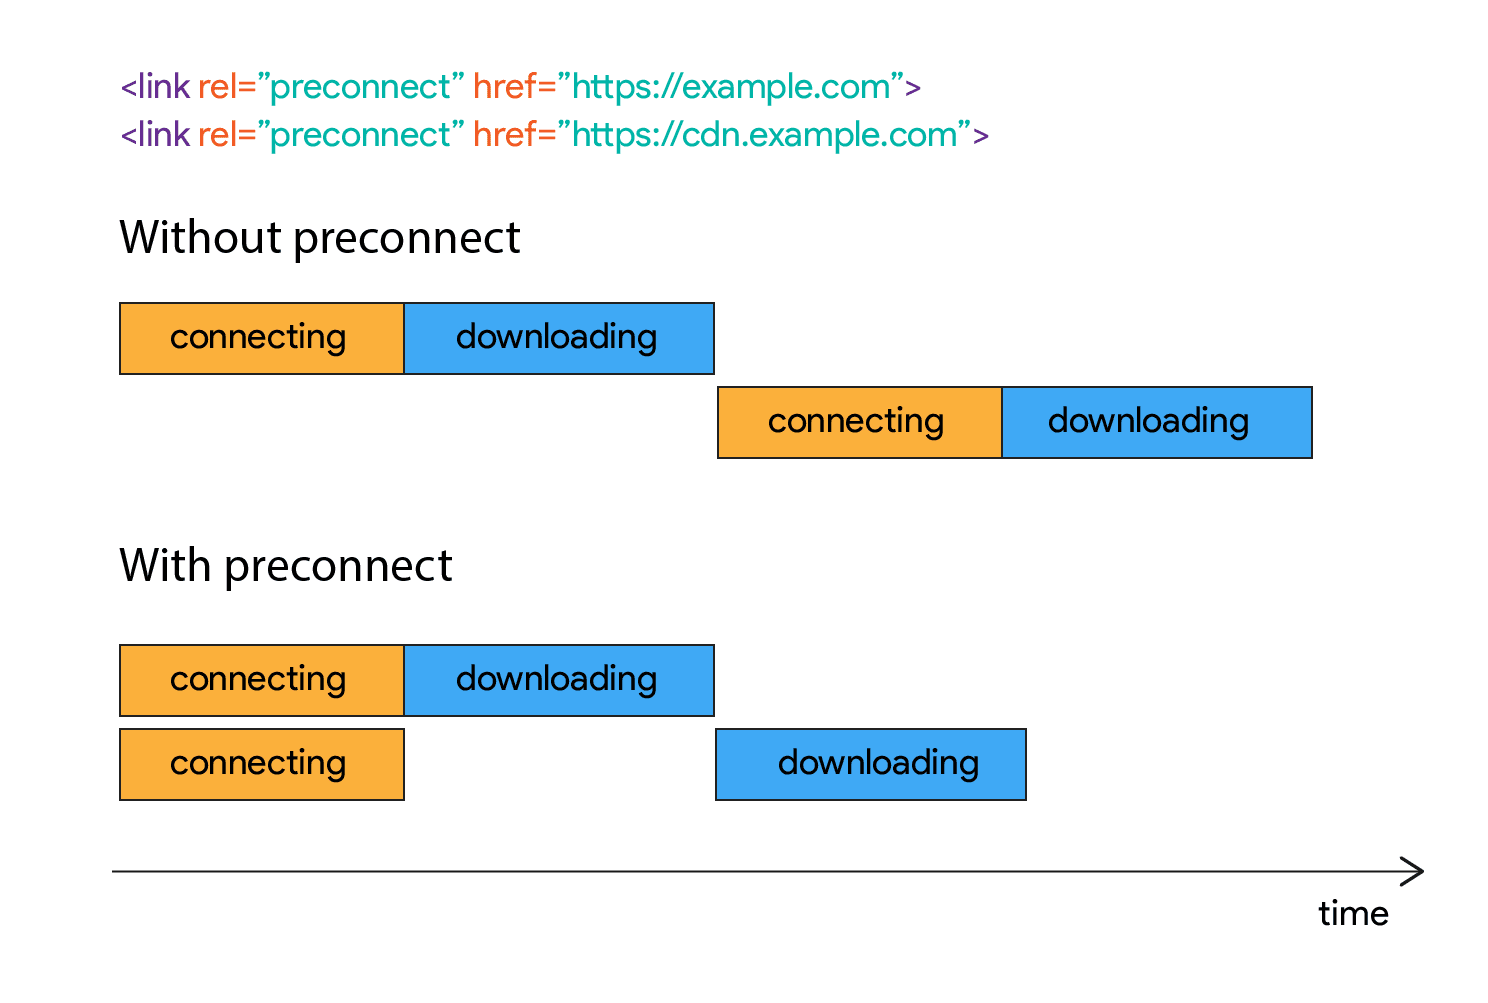 A diagram showing how the download doesn't start for a while after the connection is established.